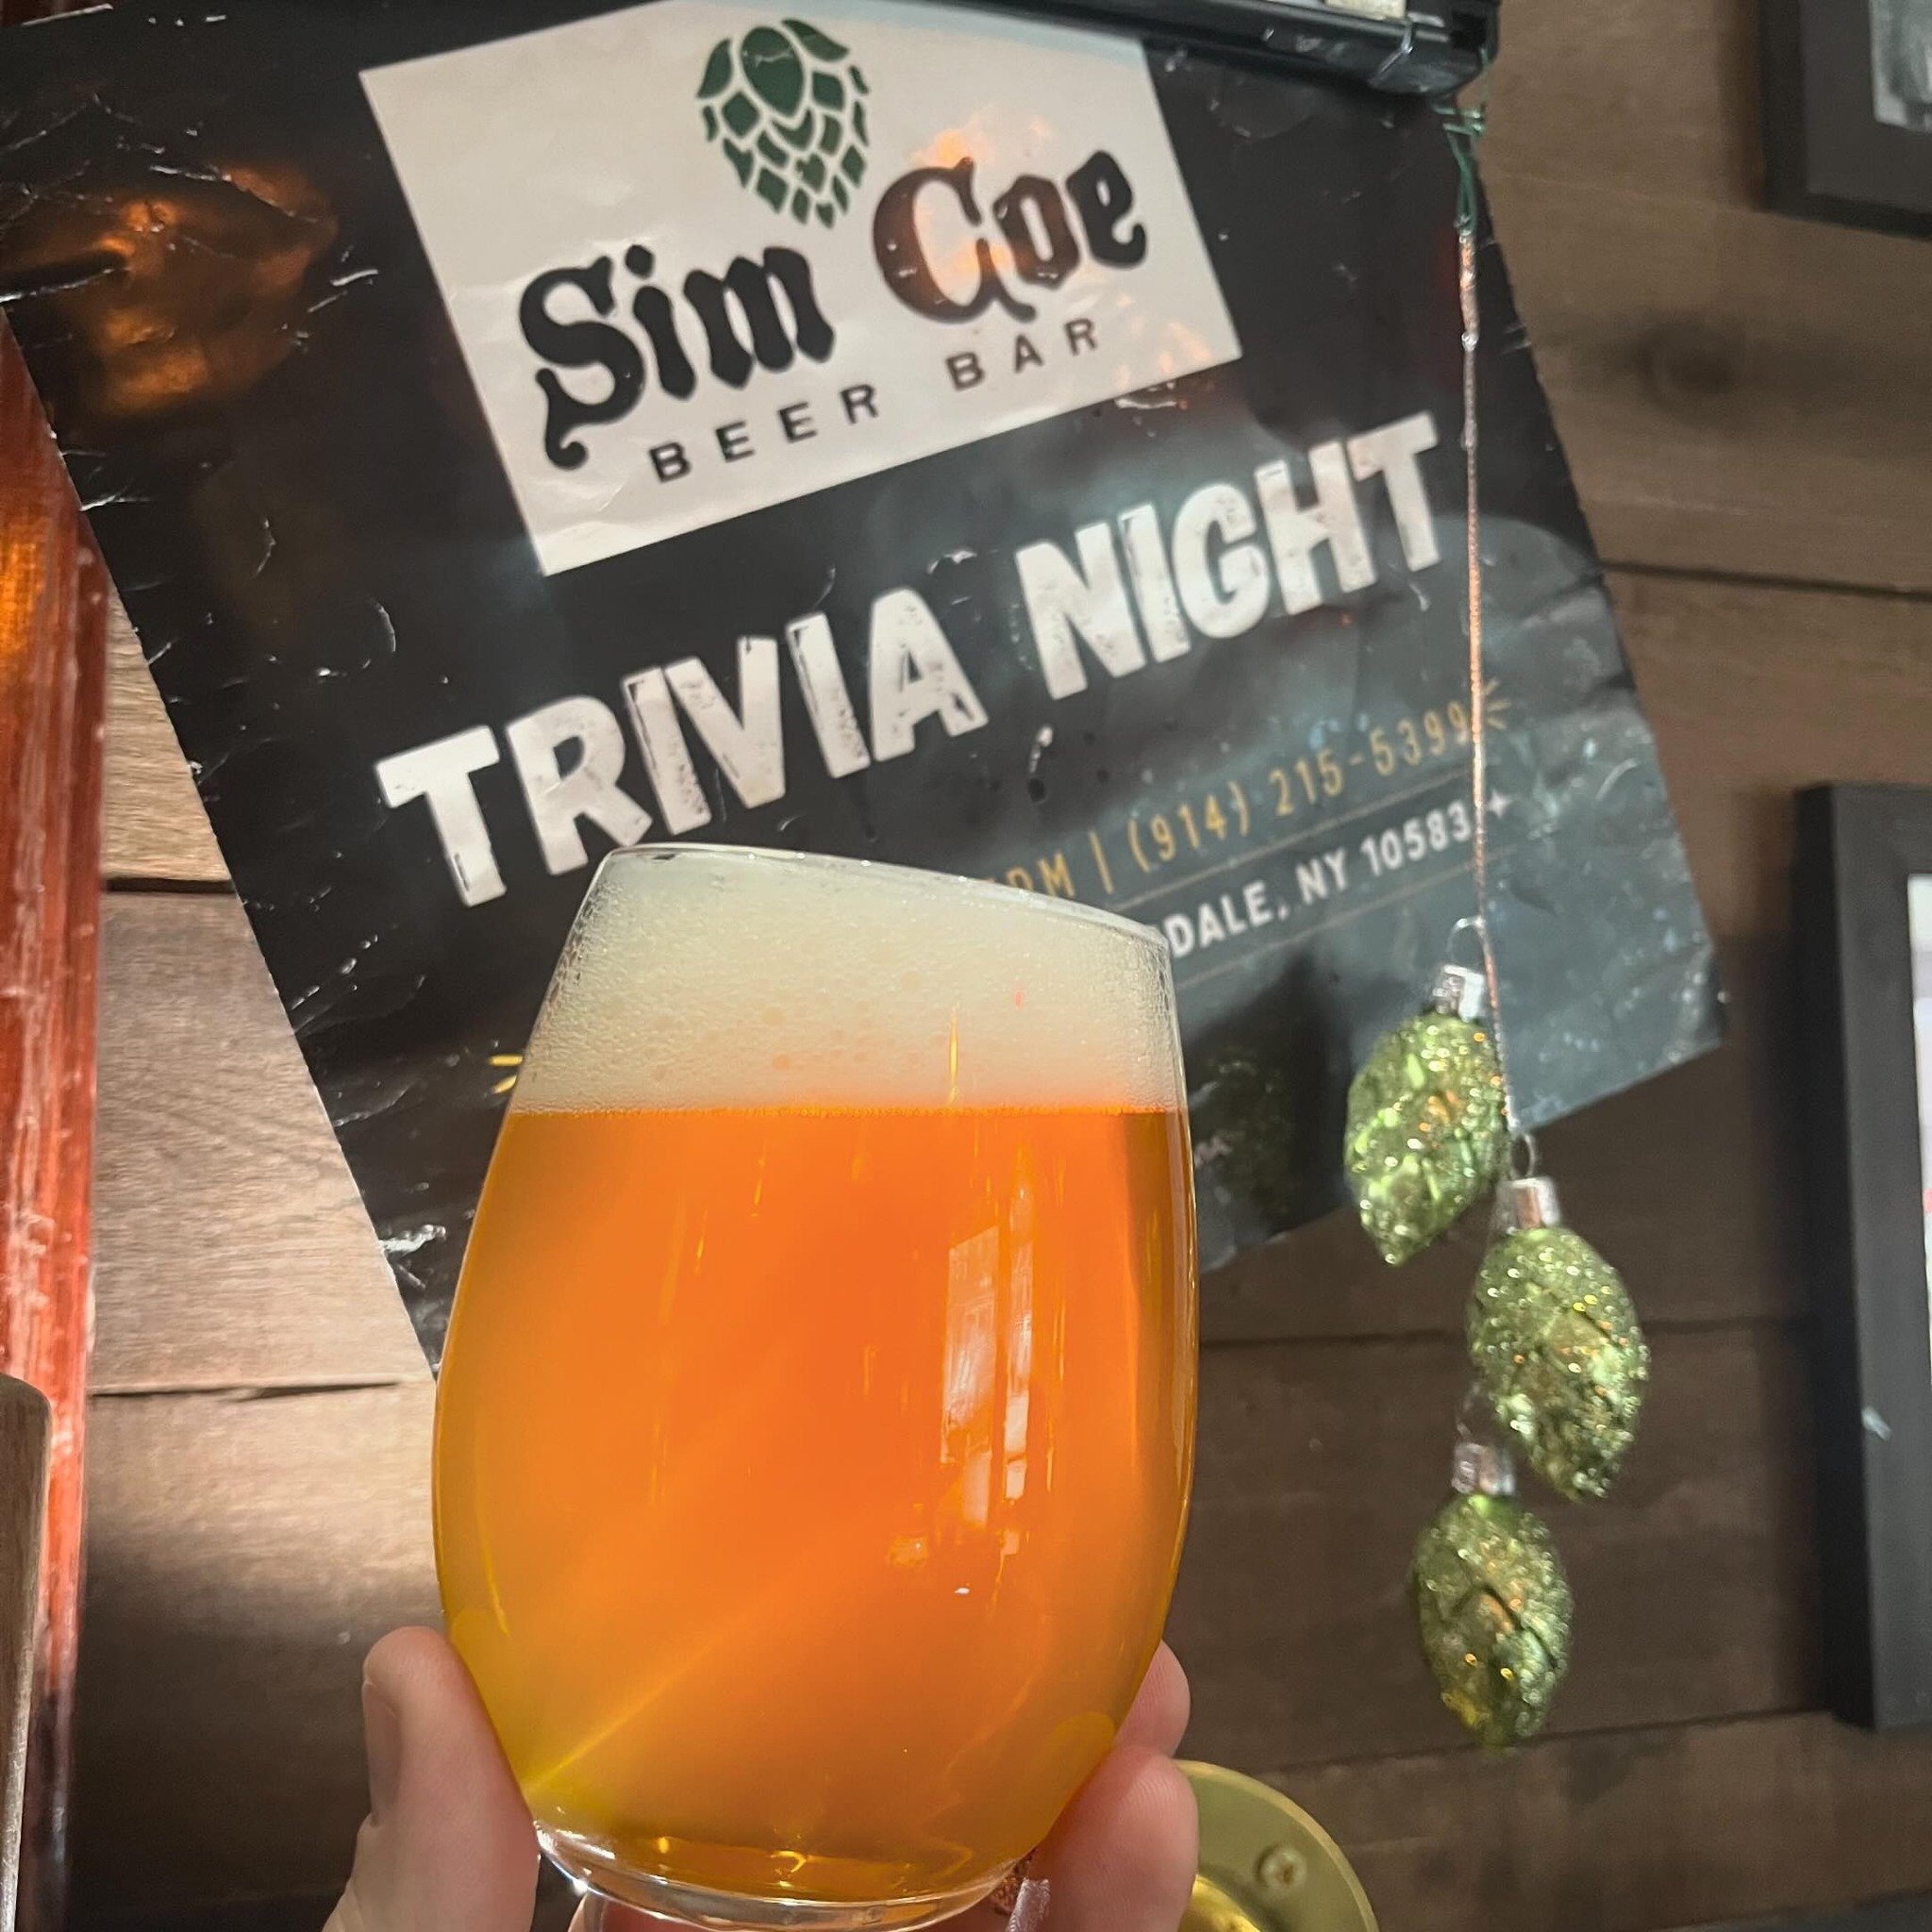 Trivia kicks off at 7 tonight. But for here's a little warm up question for you. Using the scientific name for hops, what animal are they named after? Bonus points if you also get the descriptor word that goes along with it. 
Cheers 
.
Hint: it's als